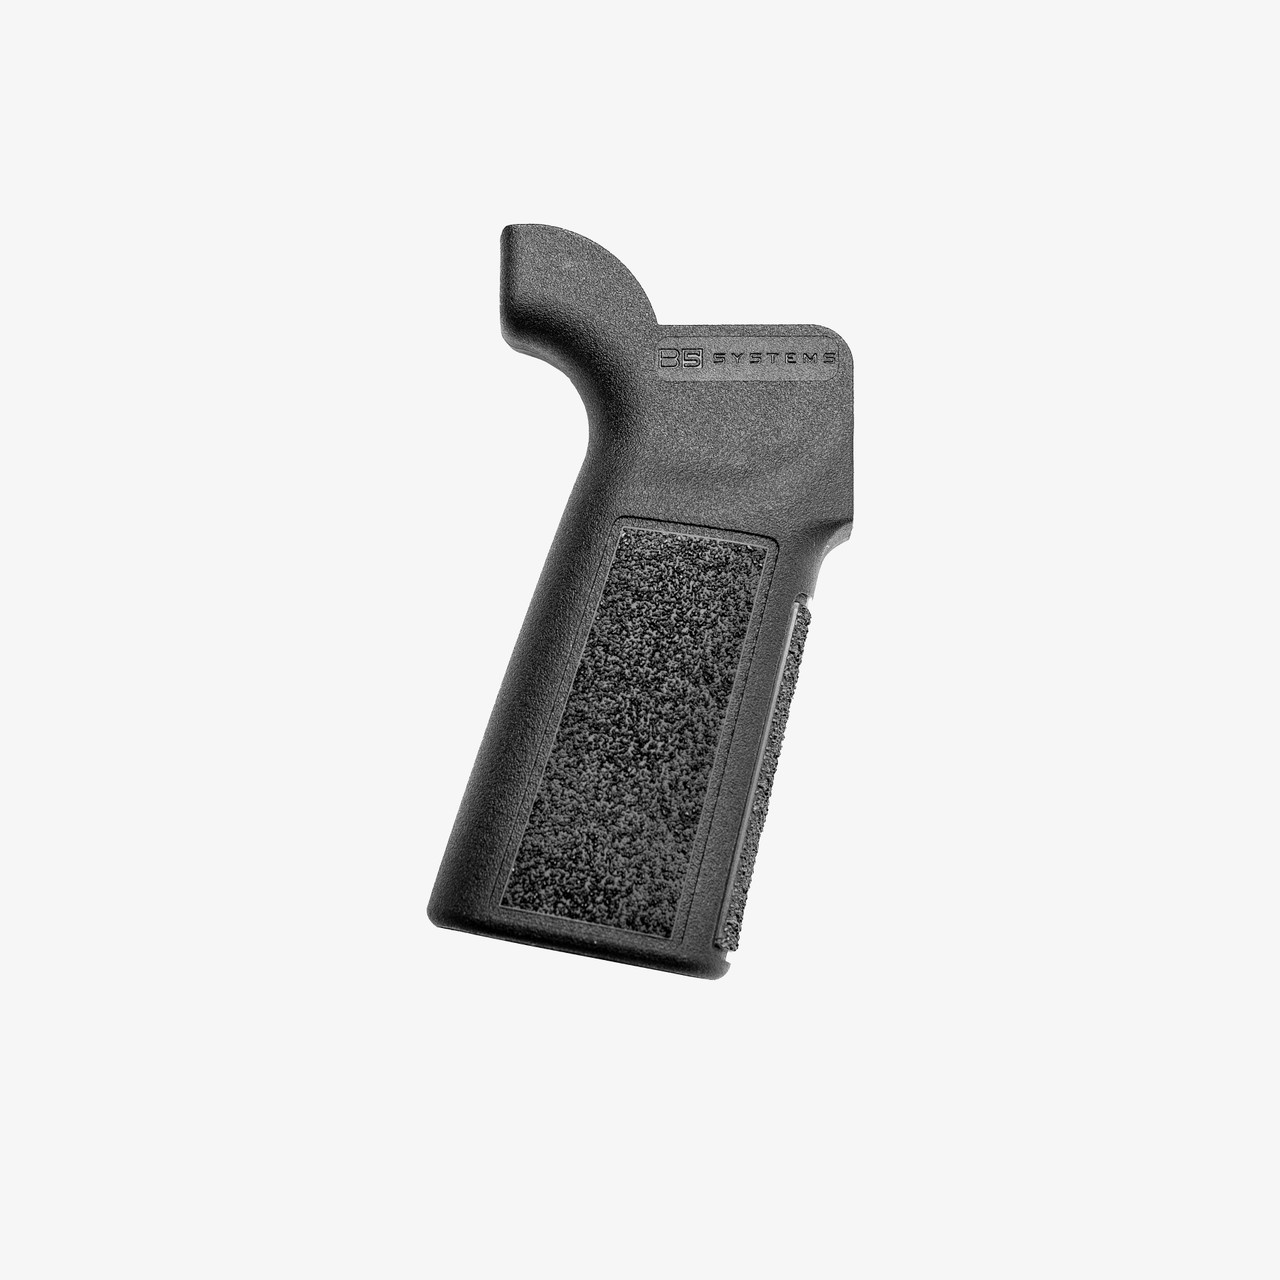 B5 SYSTEMS TYPE 23 P-GRIPS